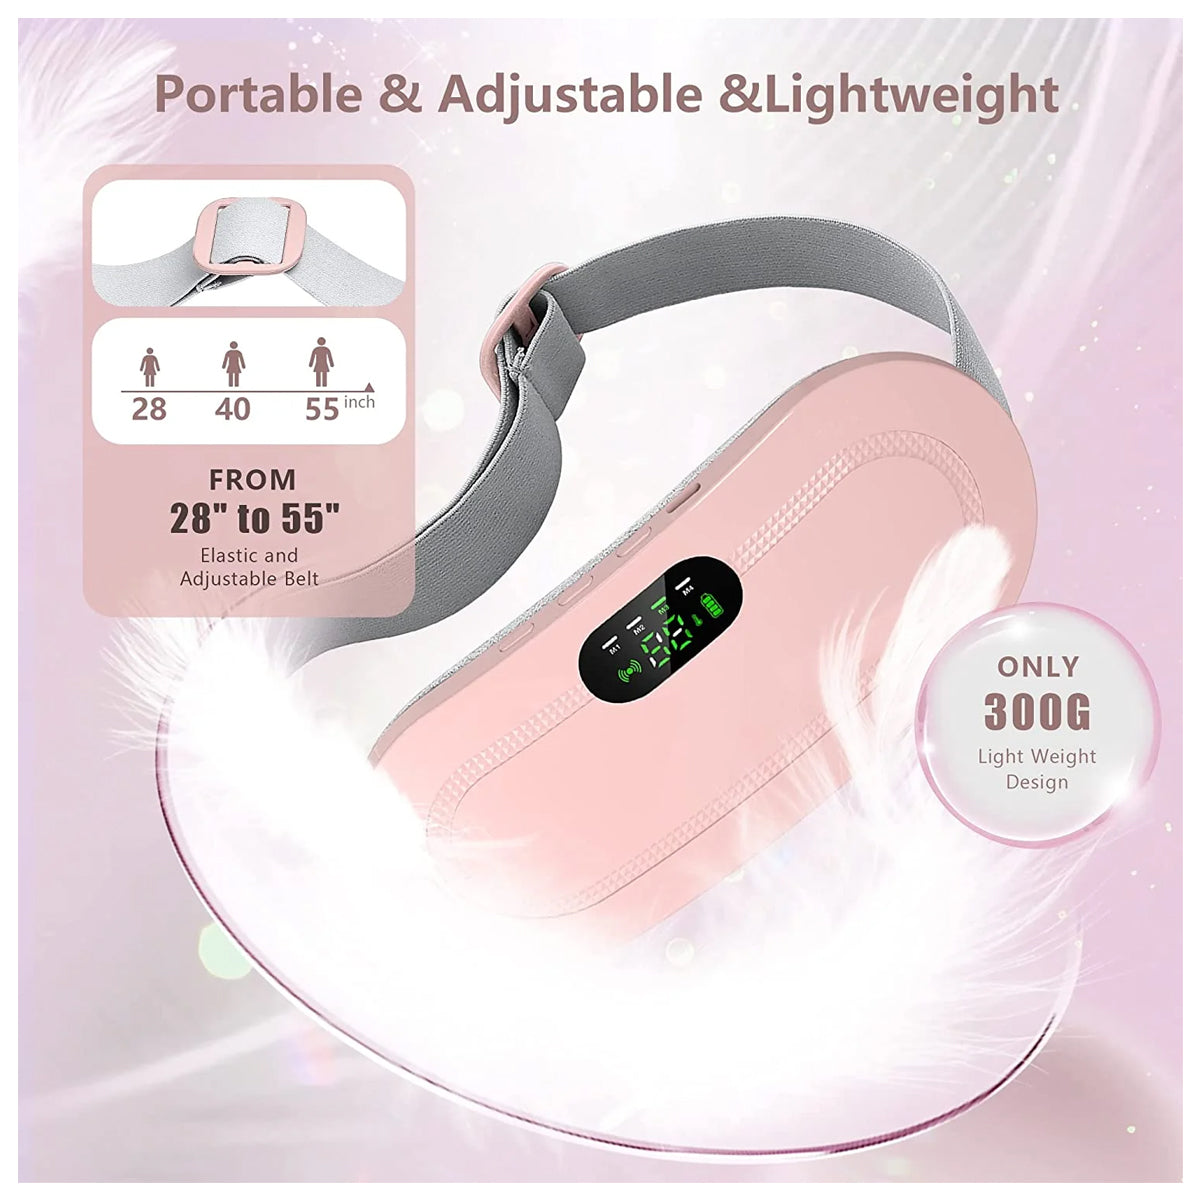 Portable Cordless Heating Pad For Menstrual Cramps Relief